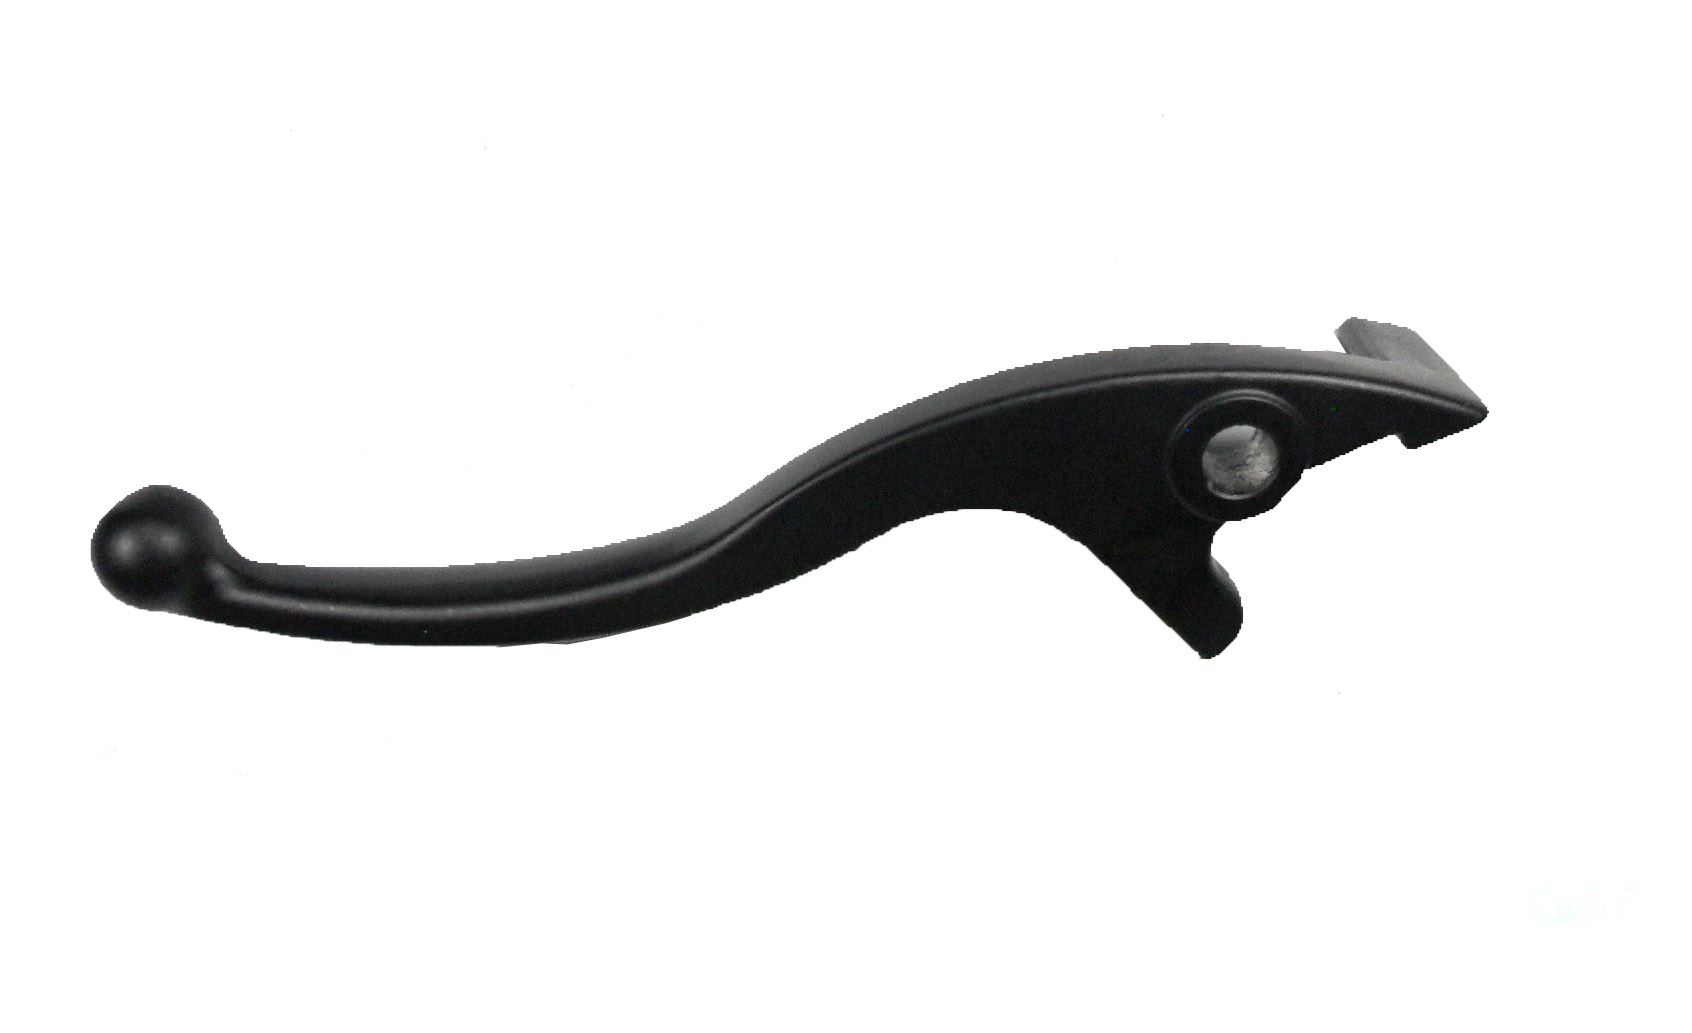 LH Front Brake Lever For Disc Brakes Fits Baja, Peace, Coolster, Apollo, 50, 70, 90, 110, 125cc Dirt Bikes.